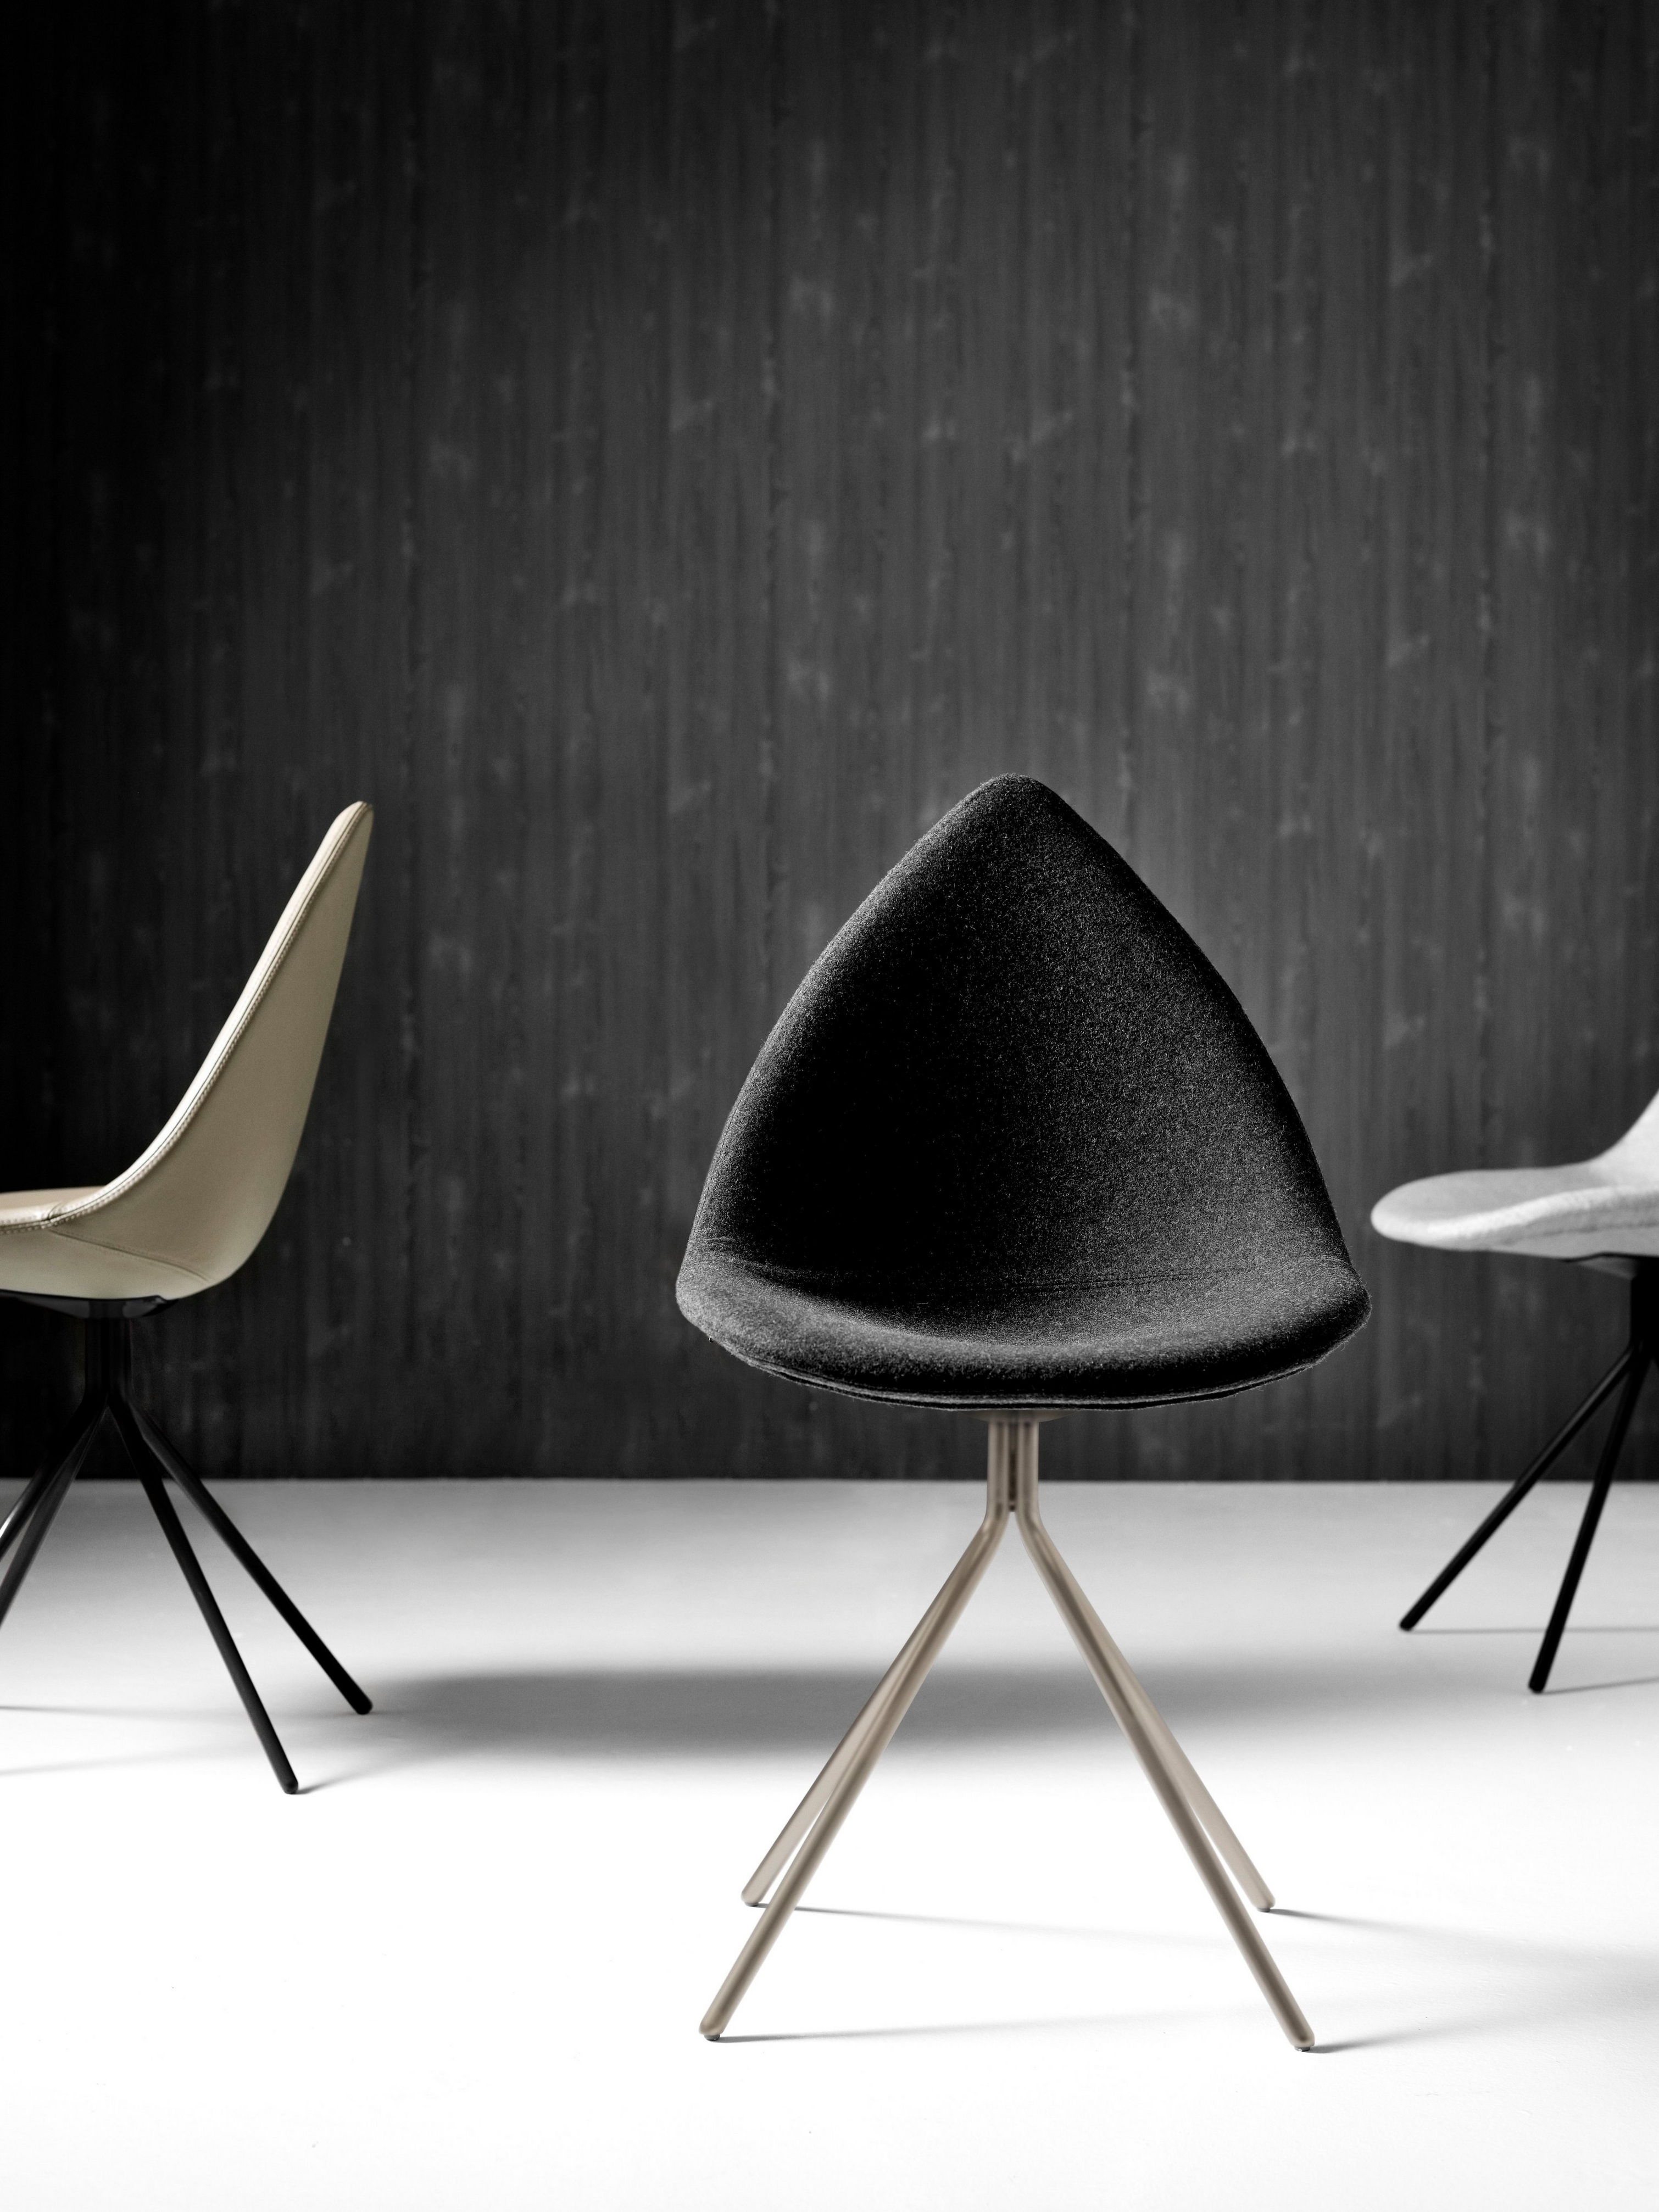 Modern Ottawa chairs in a monochrome setting with a textured black backdrop